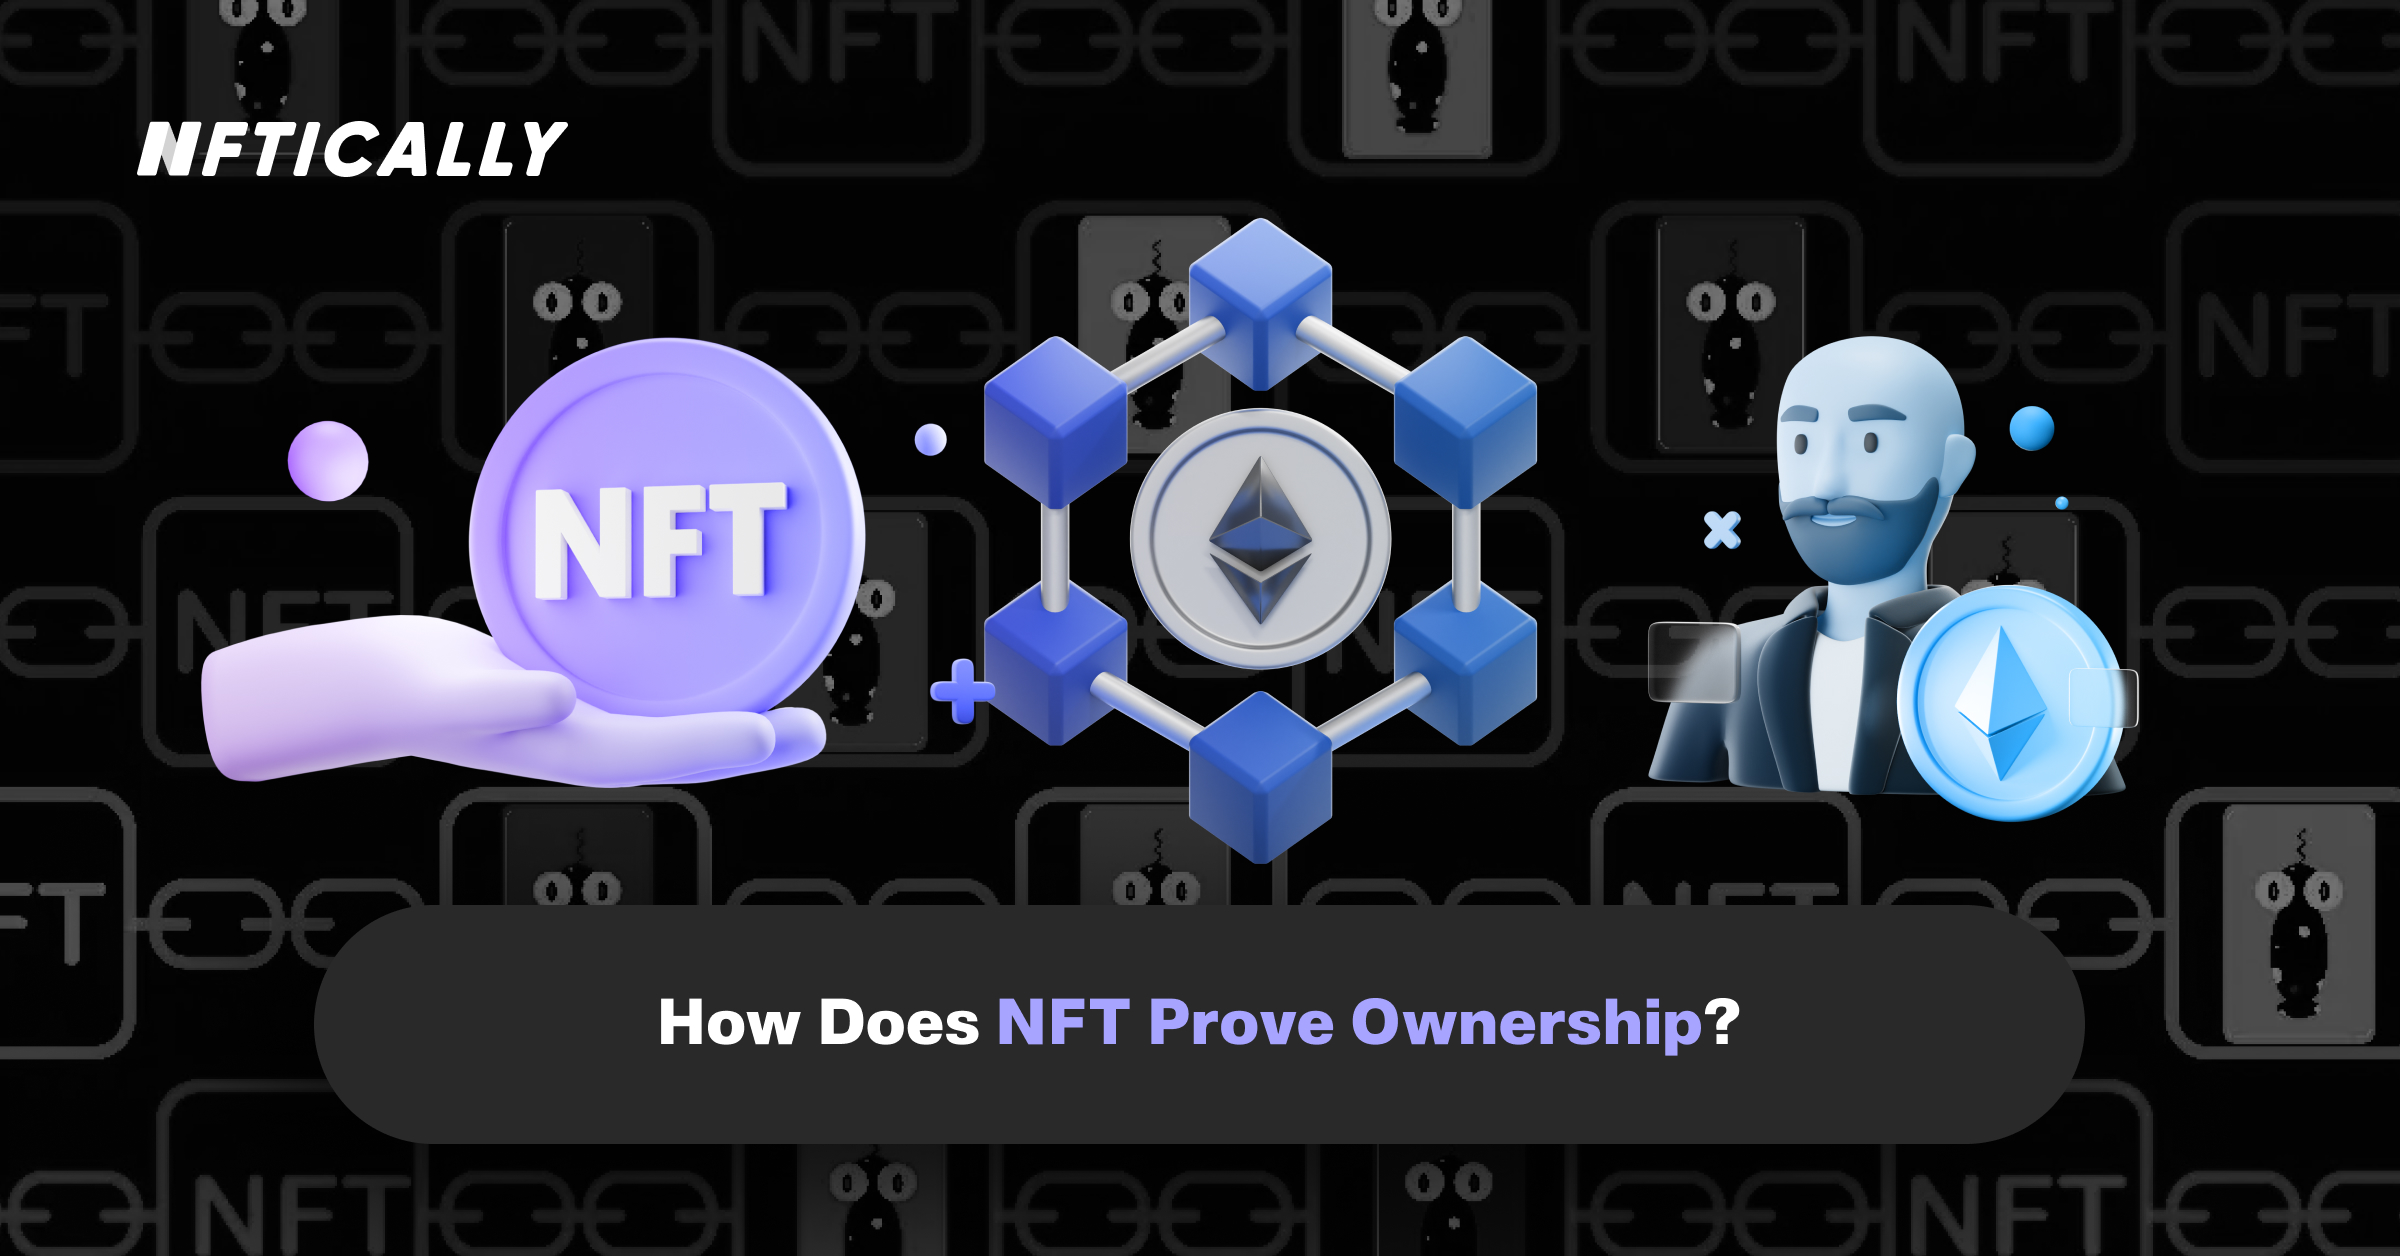 How Does NFT Prove Ownership?